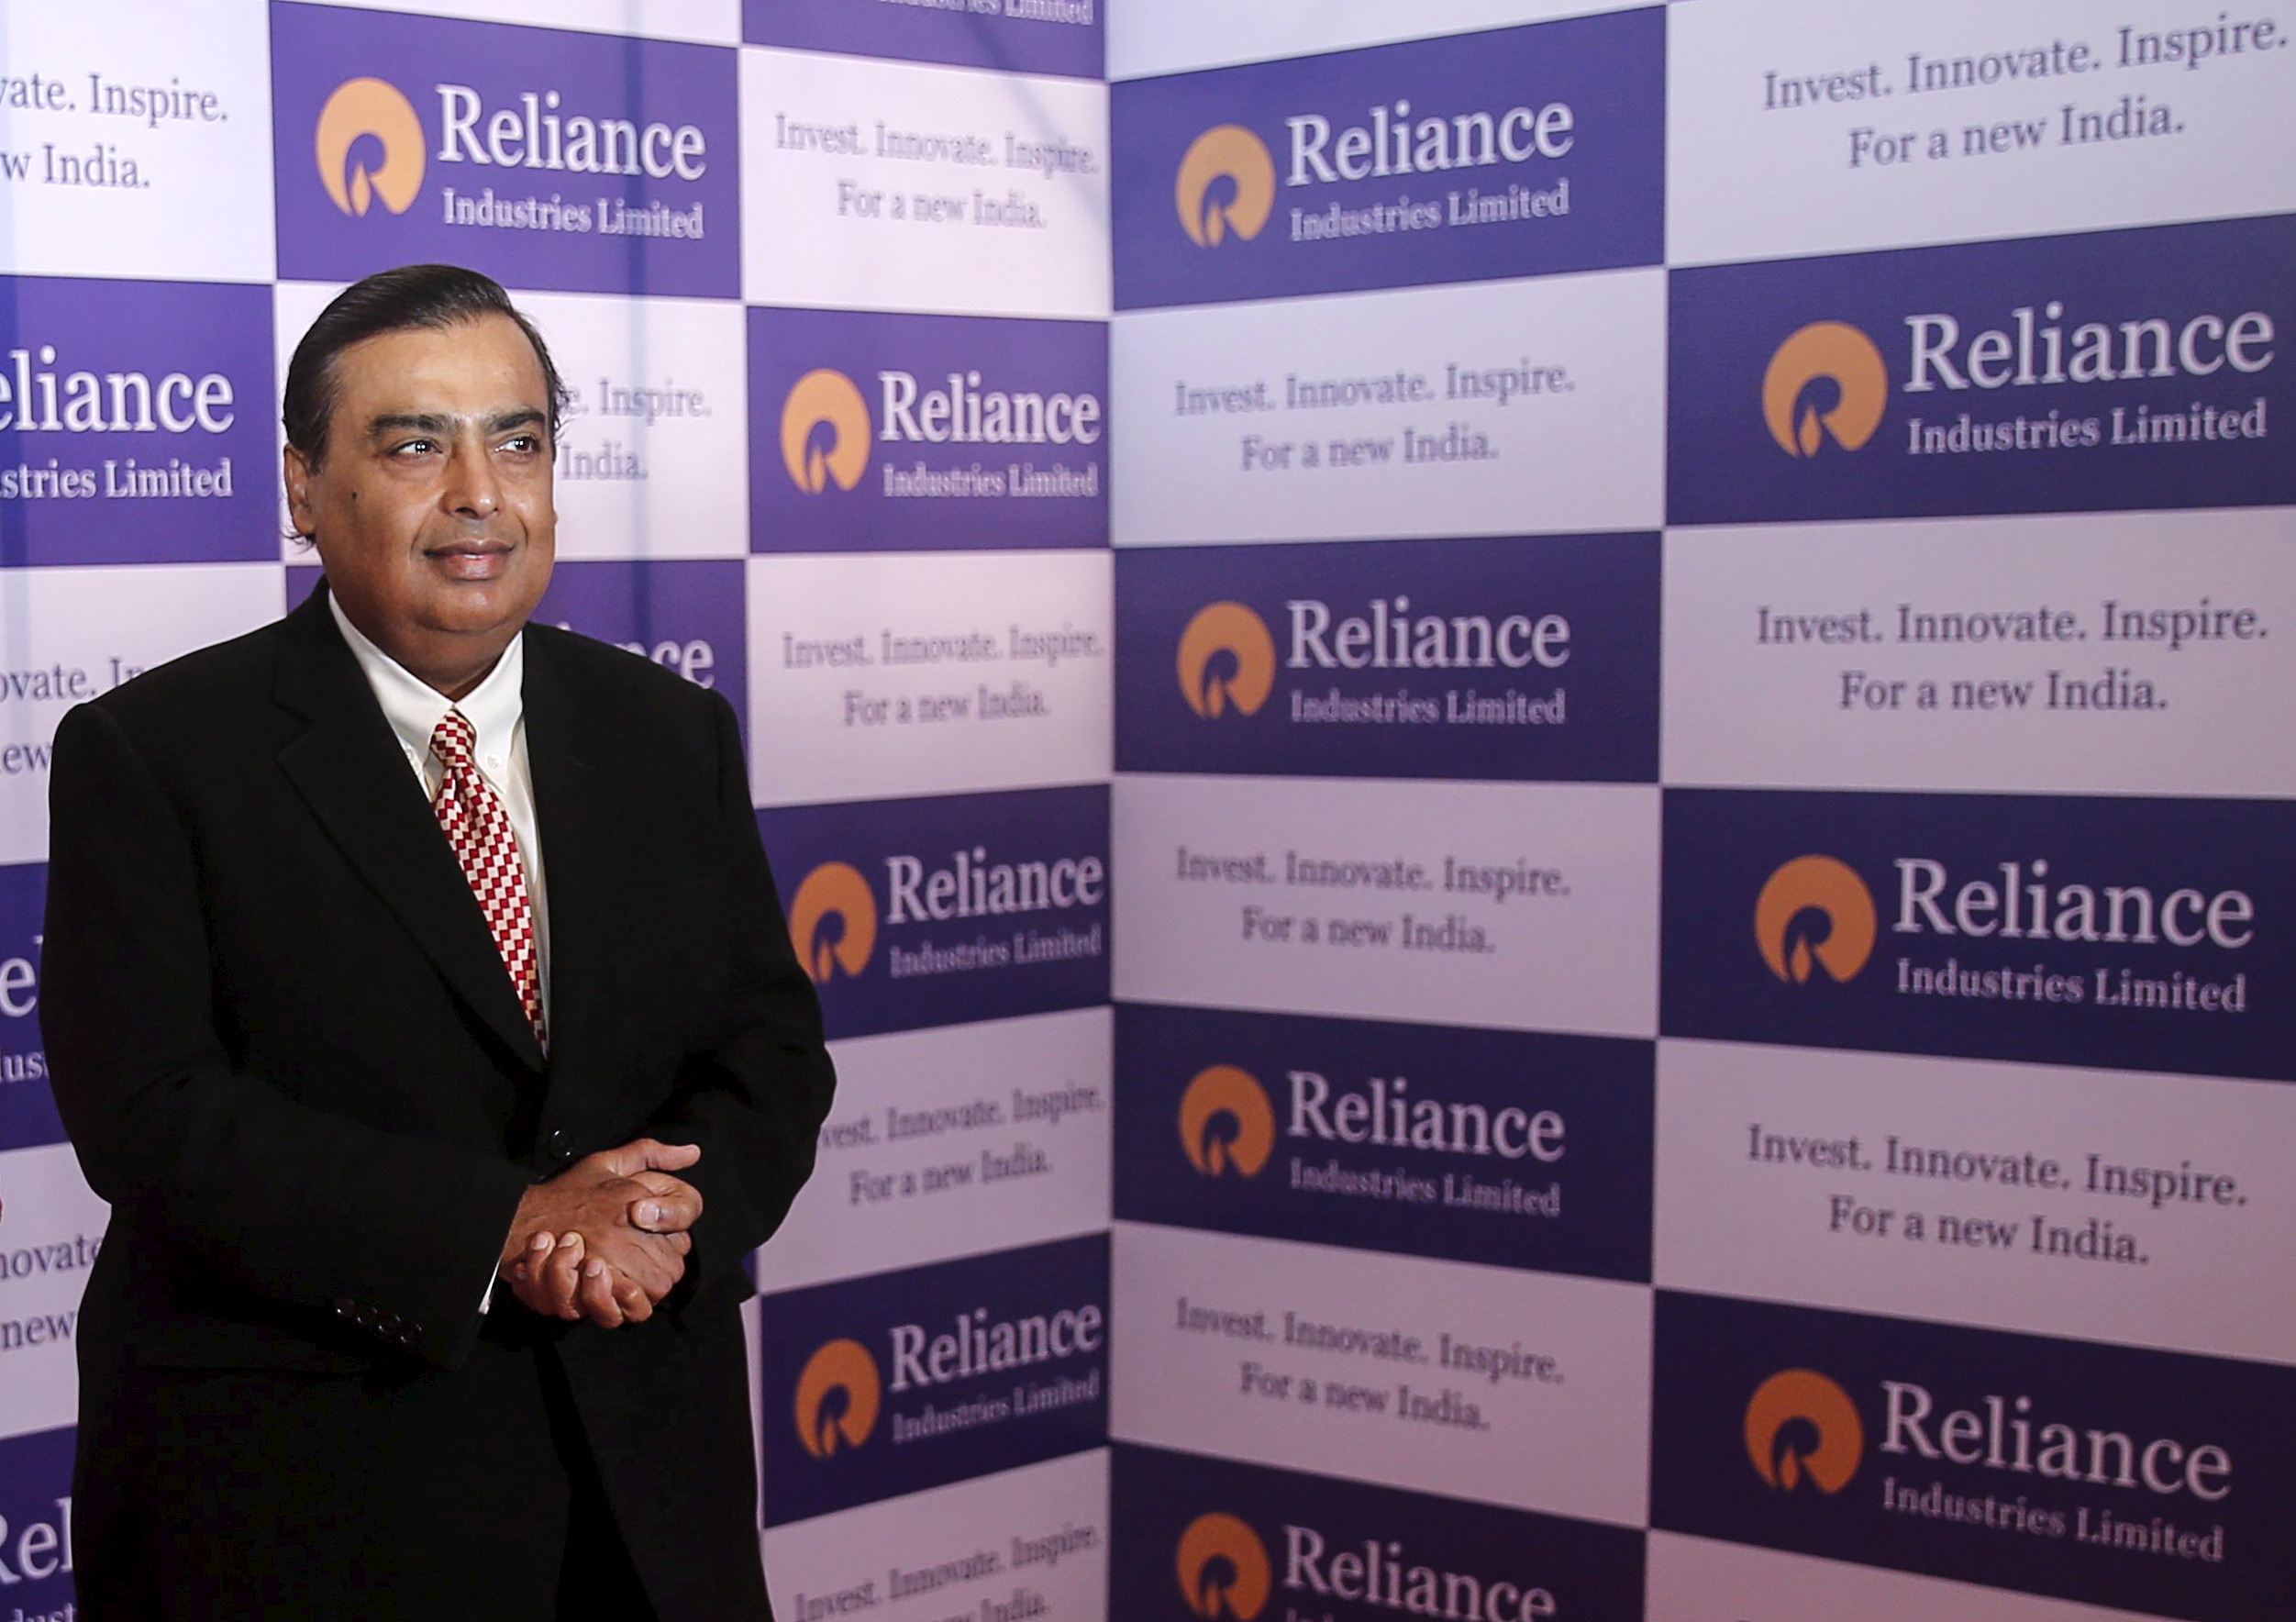 Mukesh Ambani, chairman of Reliance Industries Limited, poses for photographers before addressing the annual shareholders meeting in Mumbai